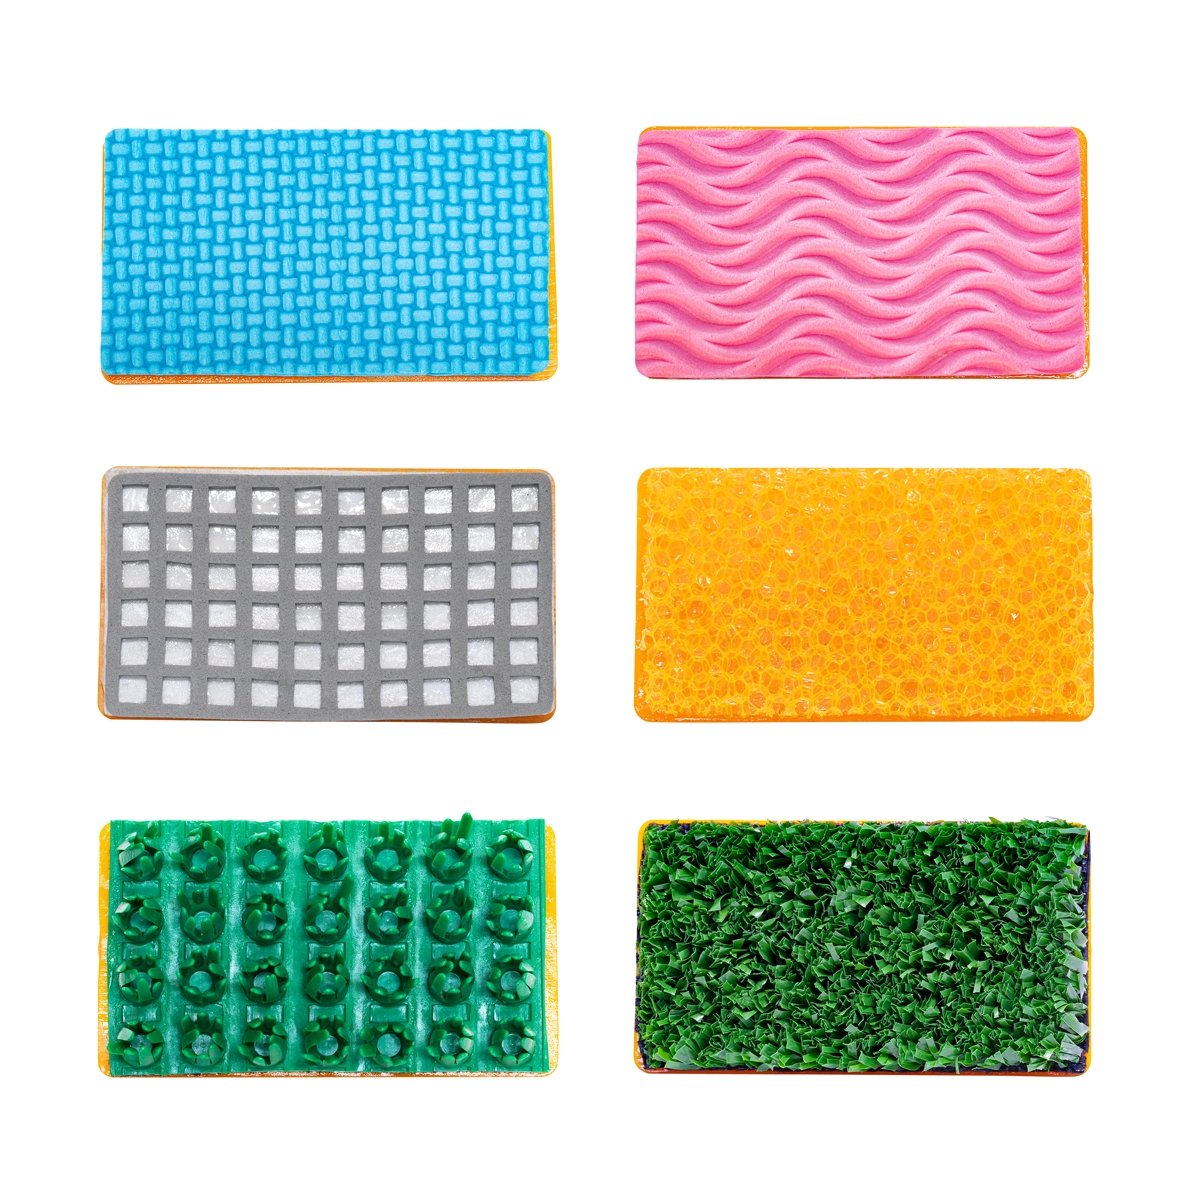 Craft Foam Rollers and Paint Tray